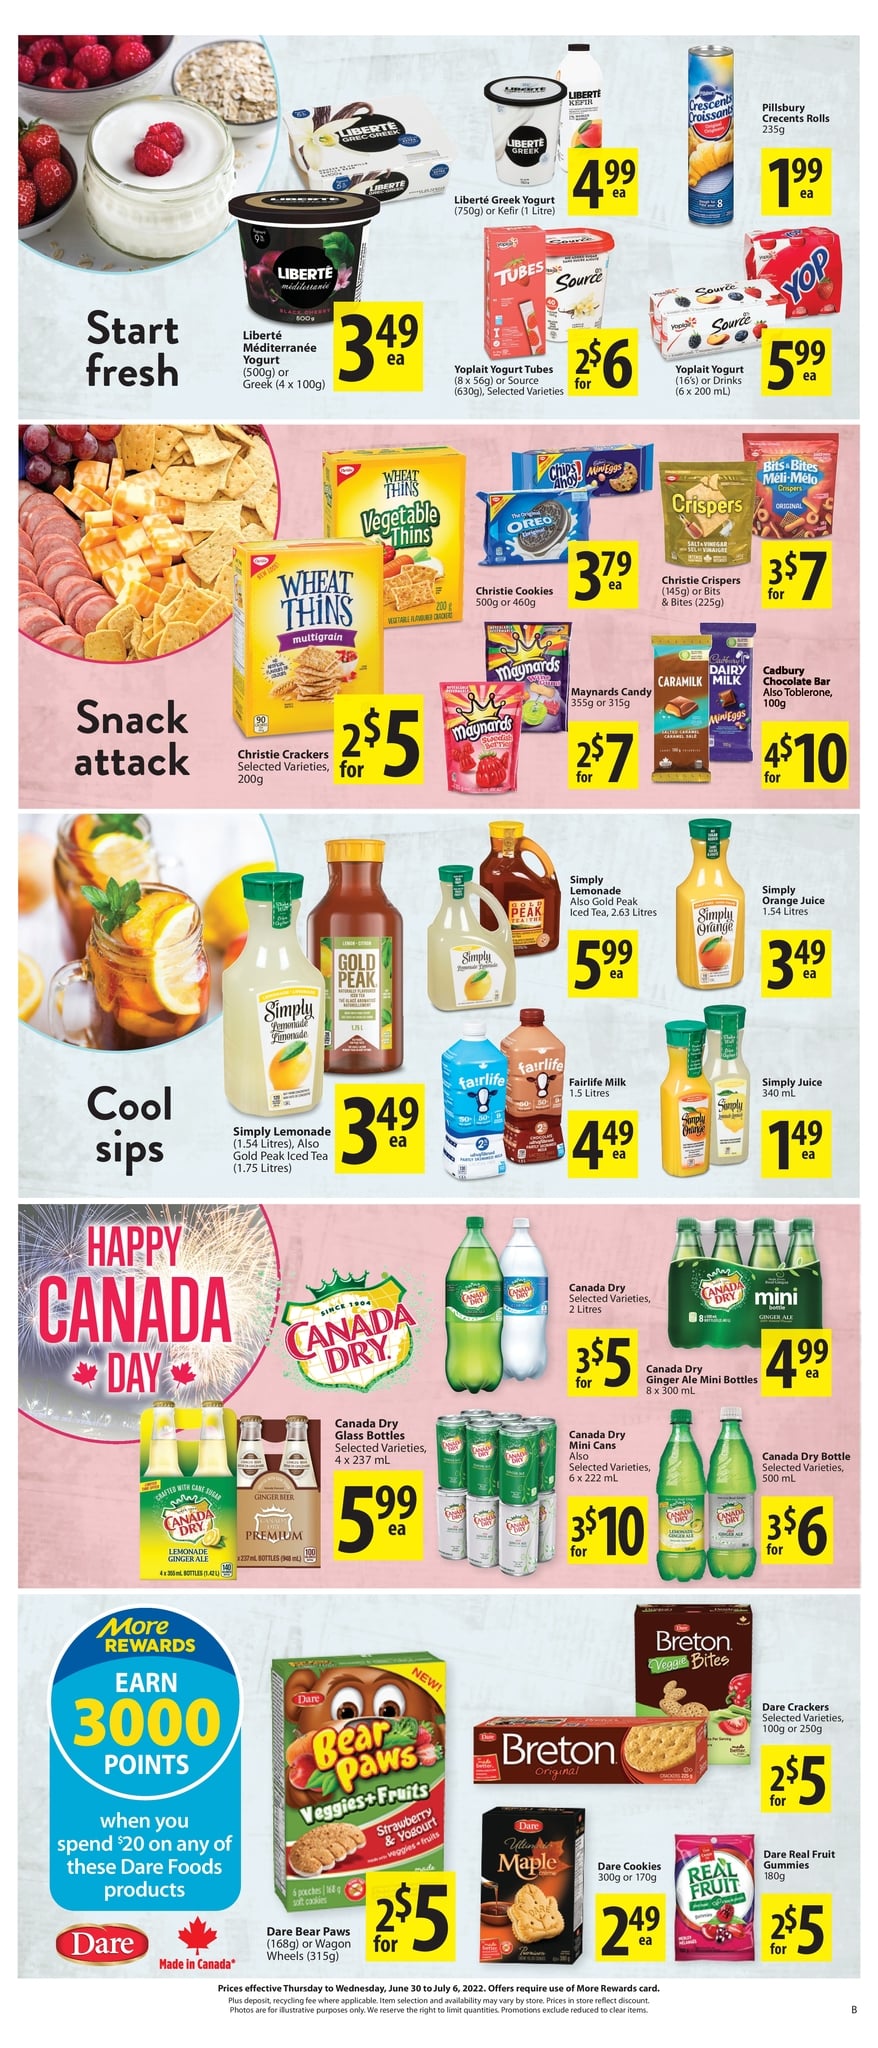 Save-On-Foods - Weekly Flyer Specials - Page 11